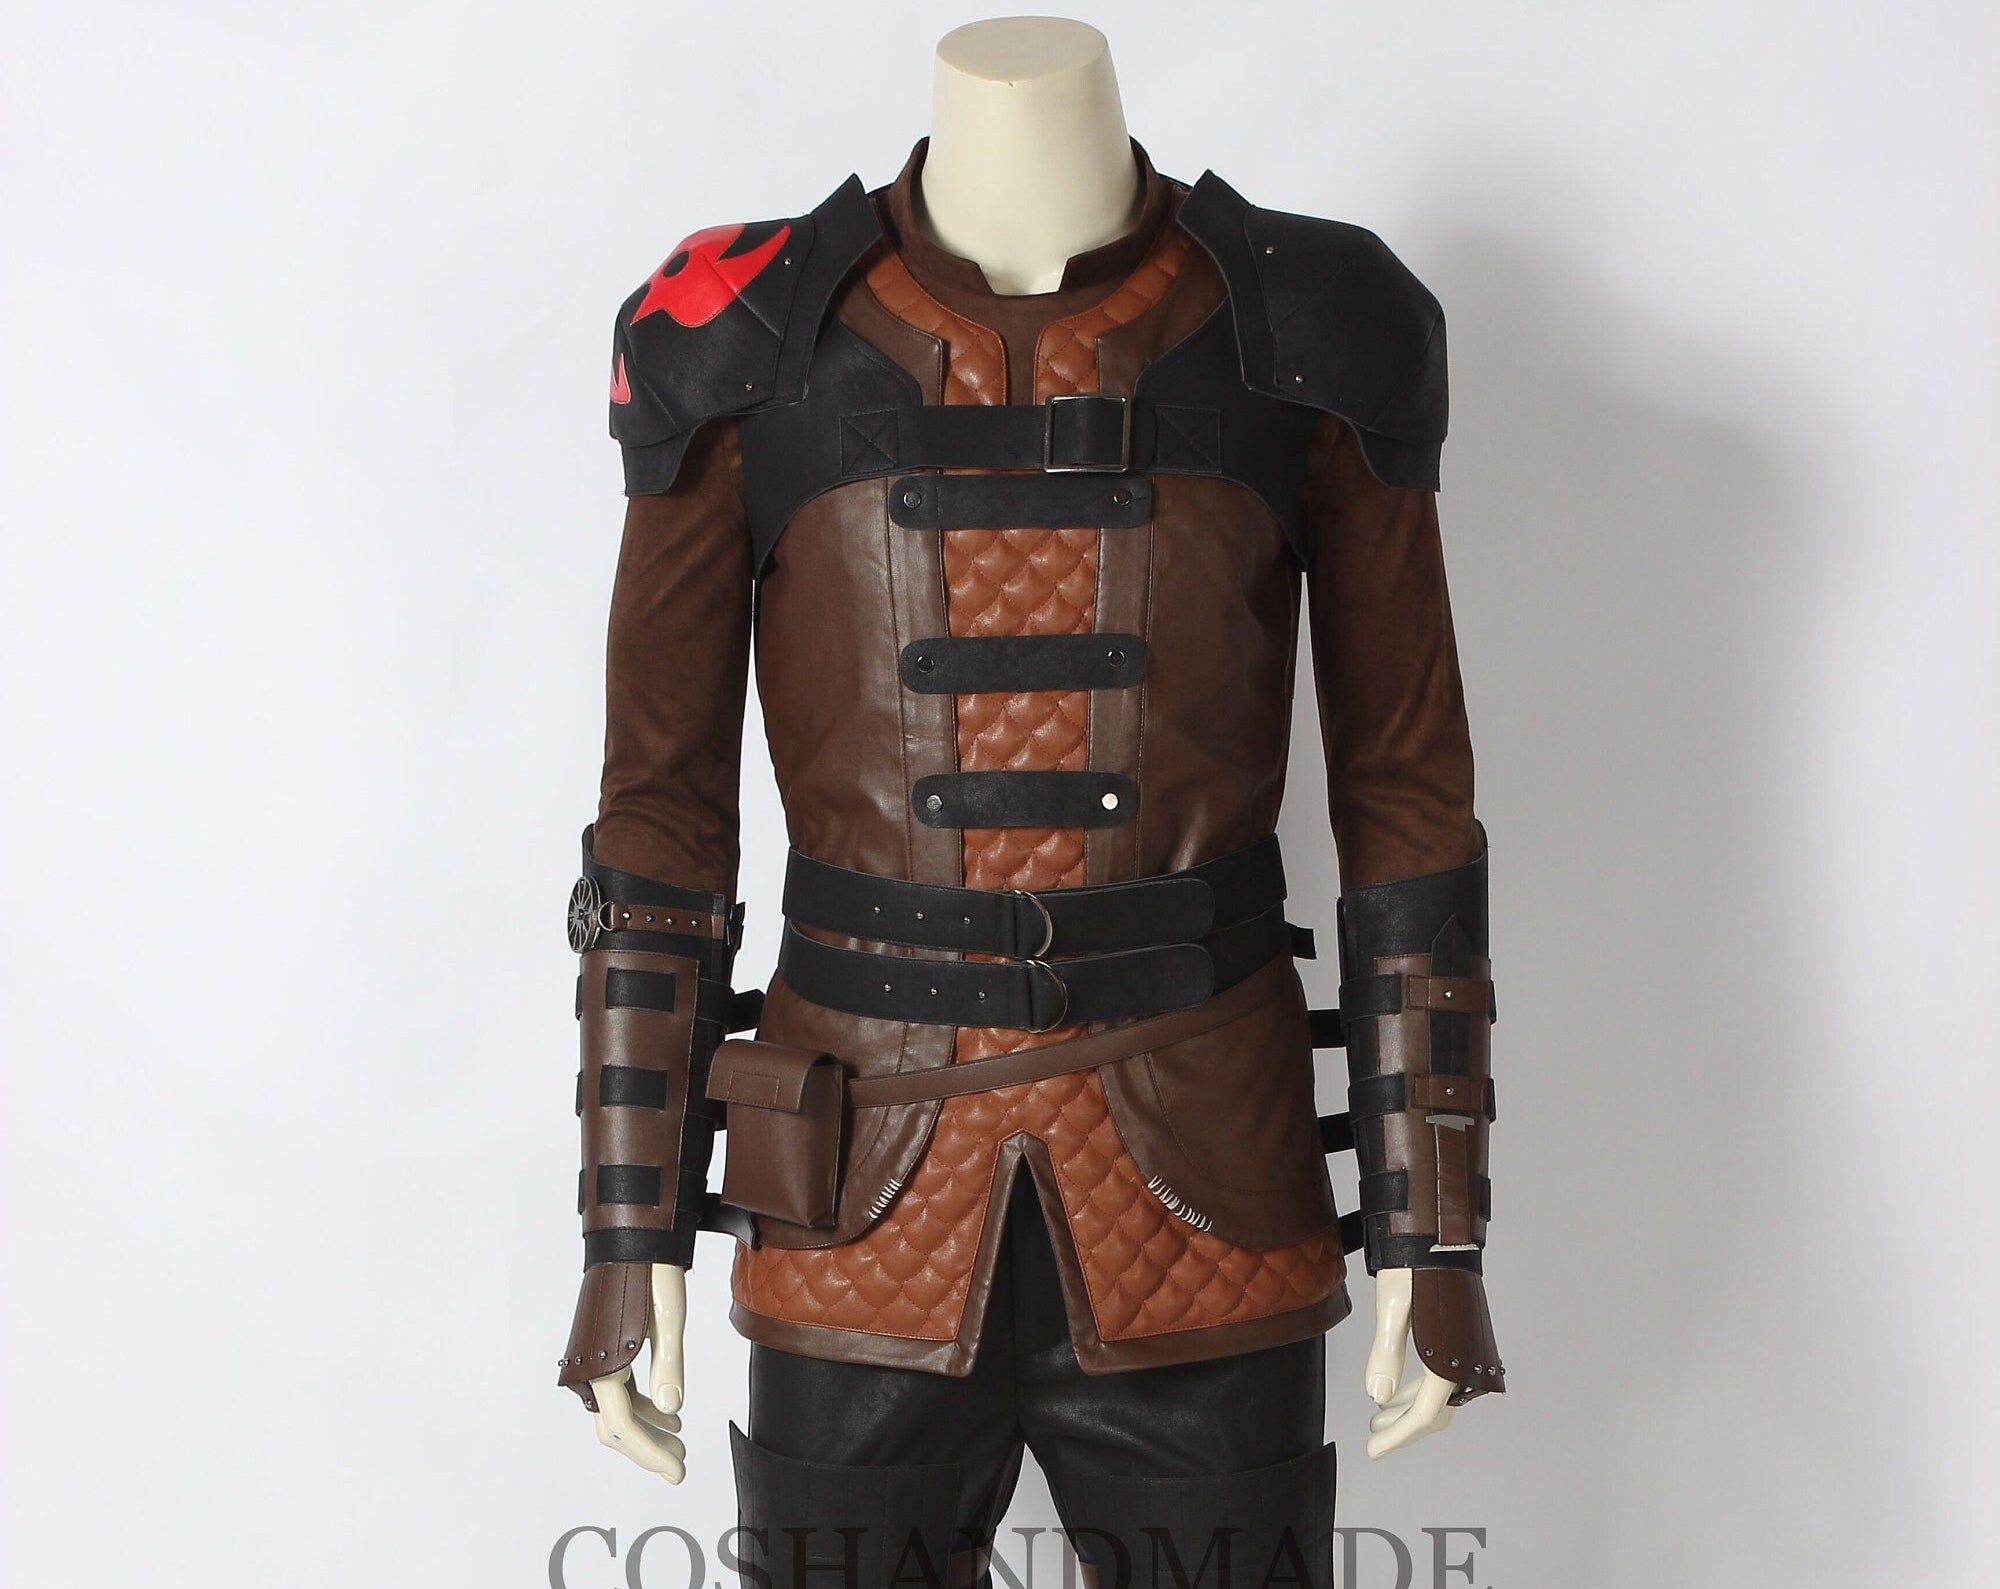 How To Train Your Dragon3 The Hidden World Hiccup Cosplay Costume Custom Made Halloween